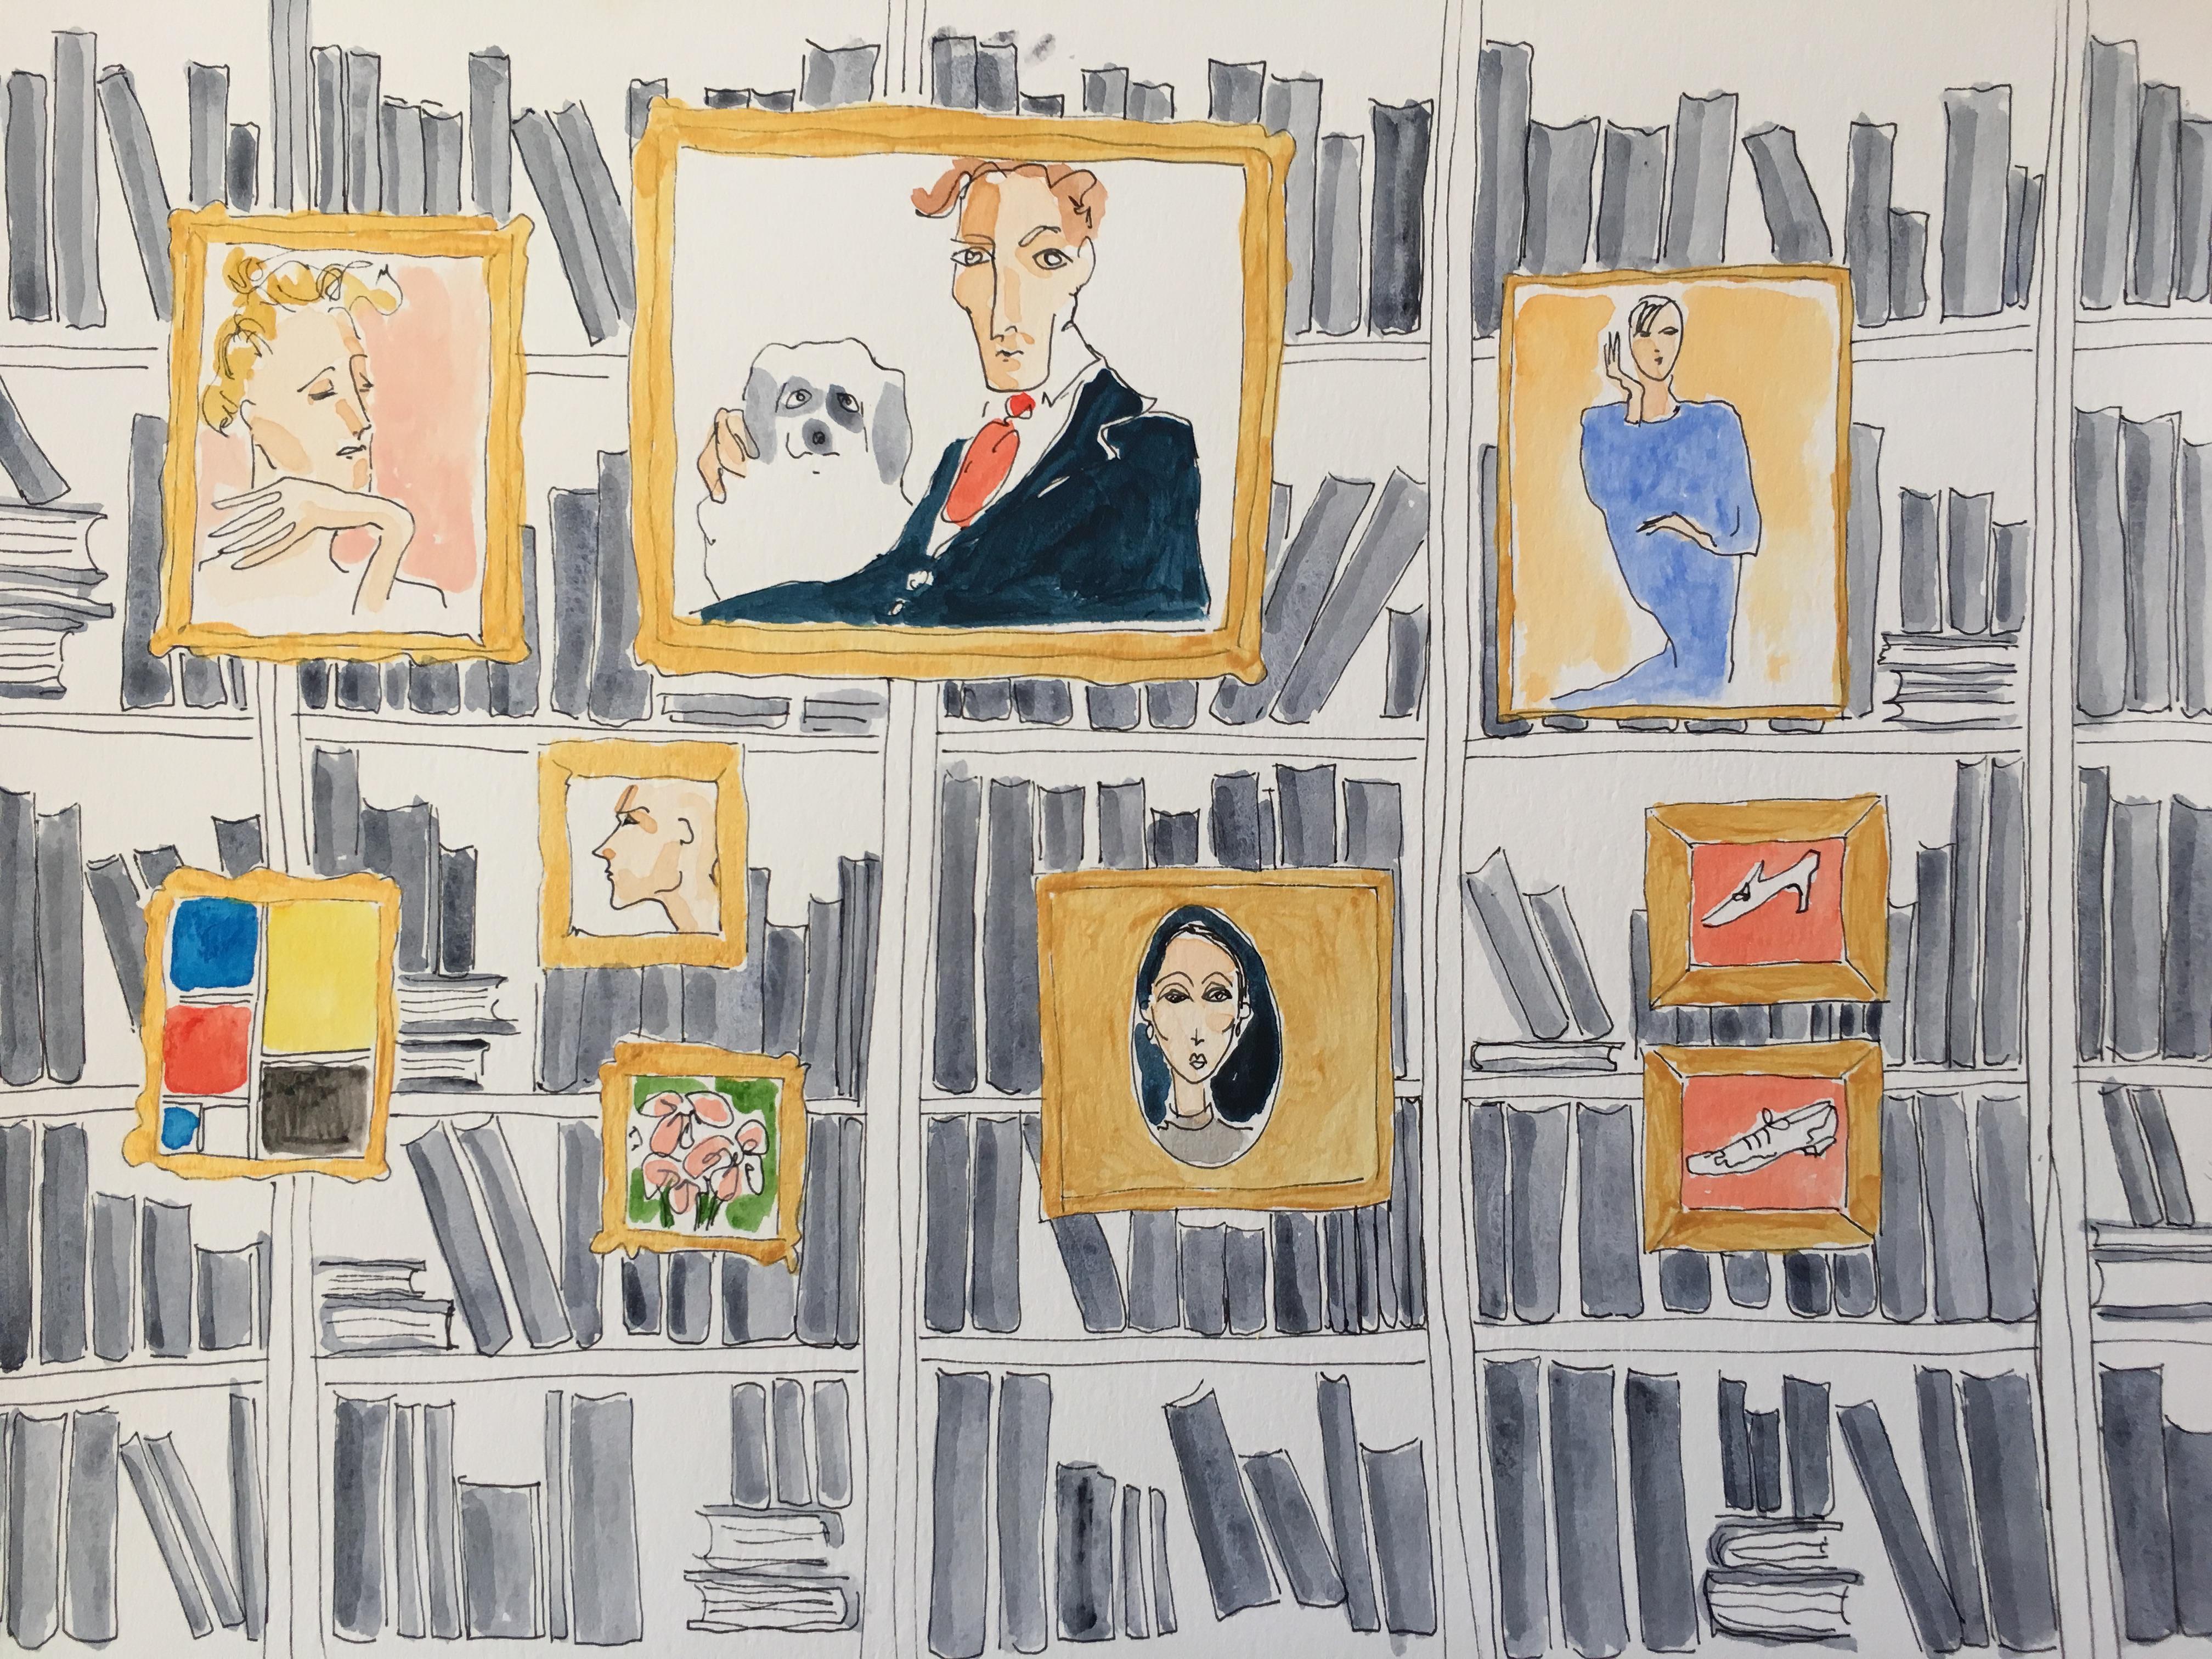 Manuel Santelices Figurative Art - The Library, 2019, Watercolor on Paper